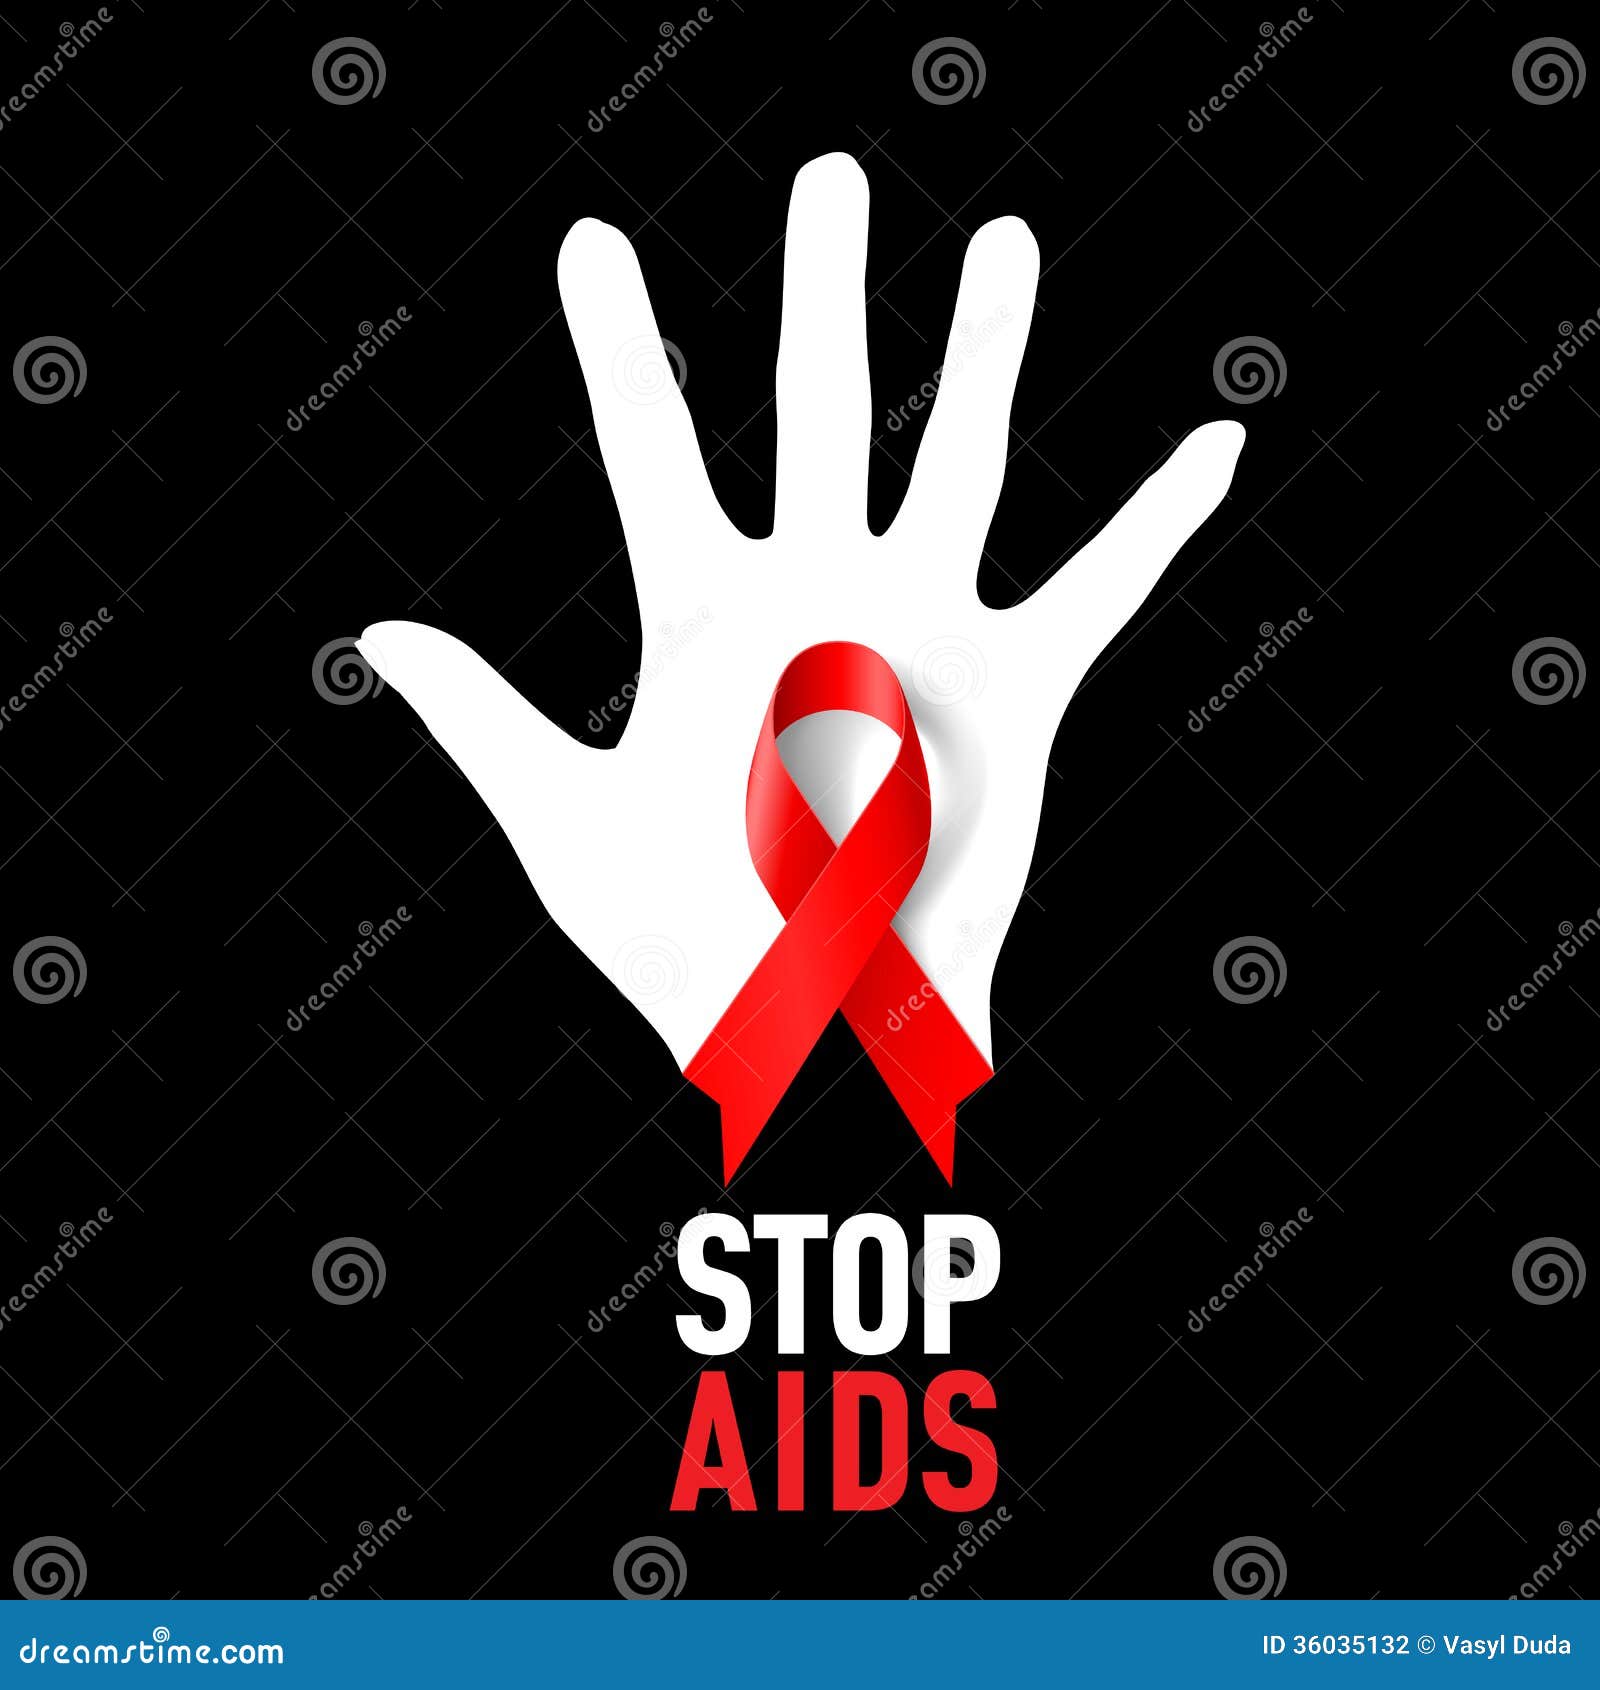 Aids Sign Stock Illustrations picture